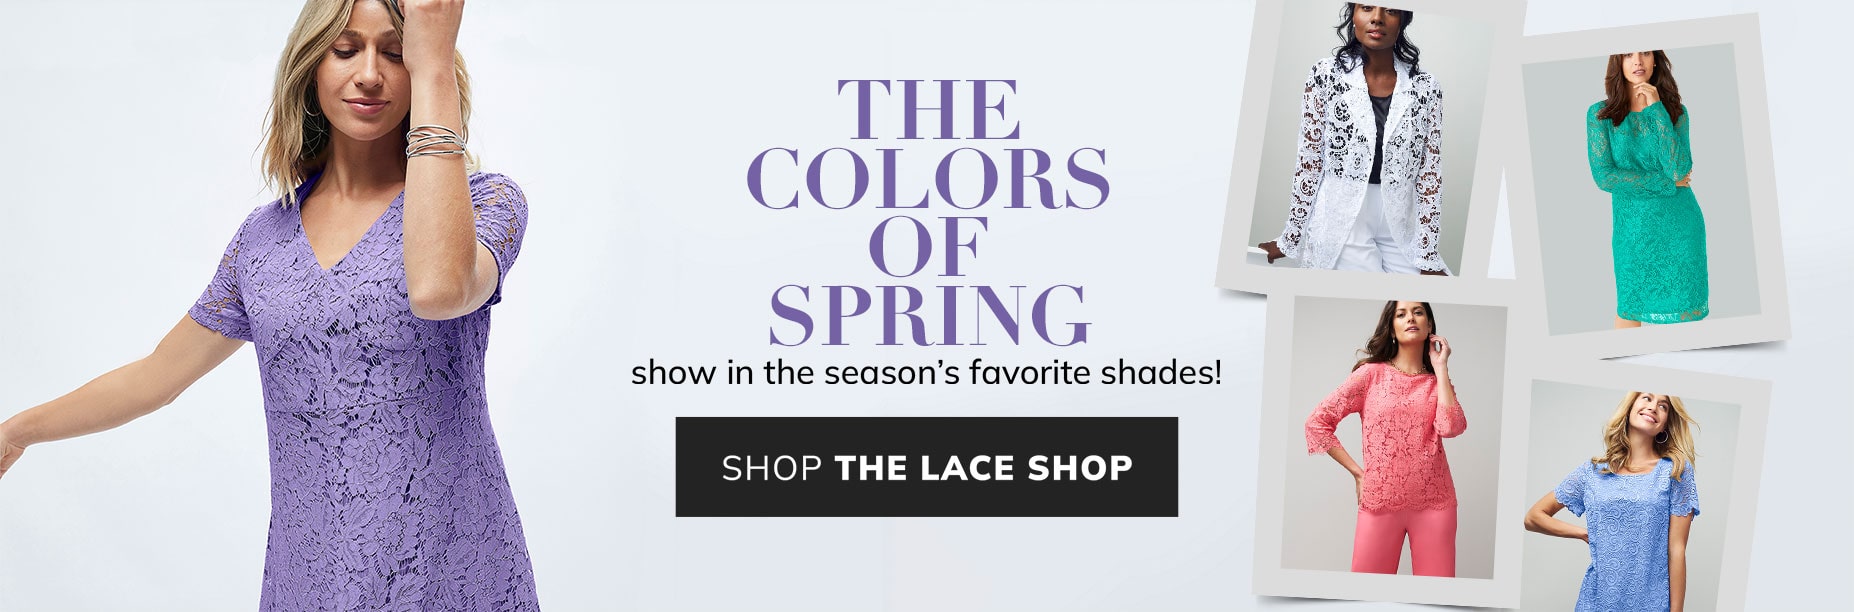 The color of spring - Lace Shop